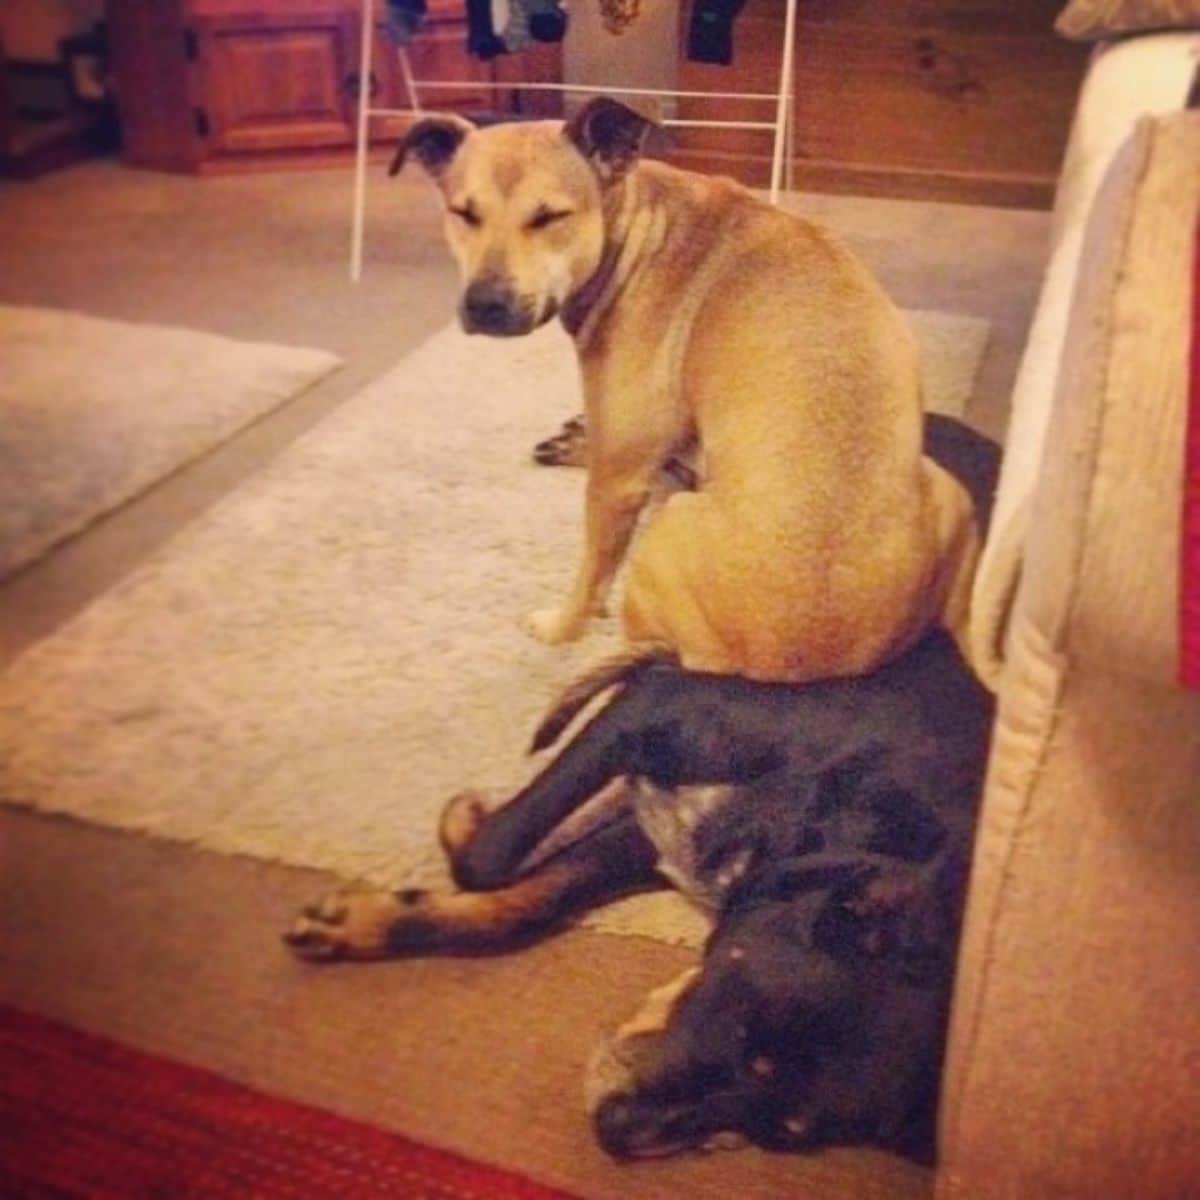 brown dog sitting on a black and brown dog laying sideways on the floor